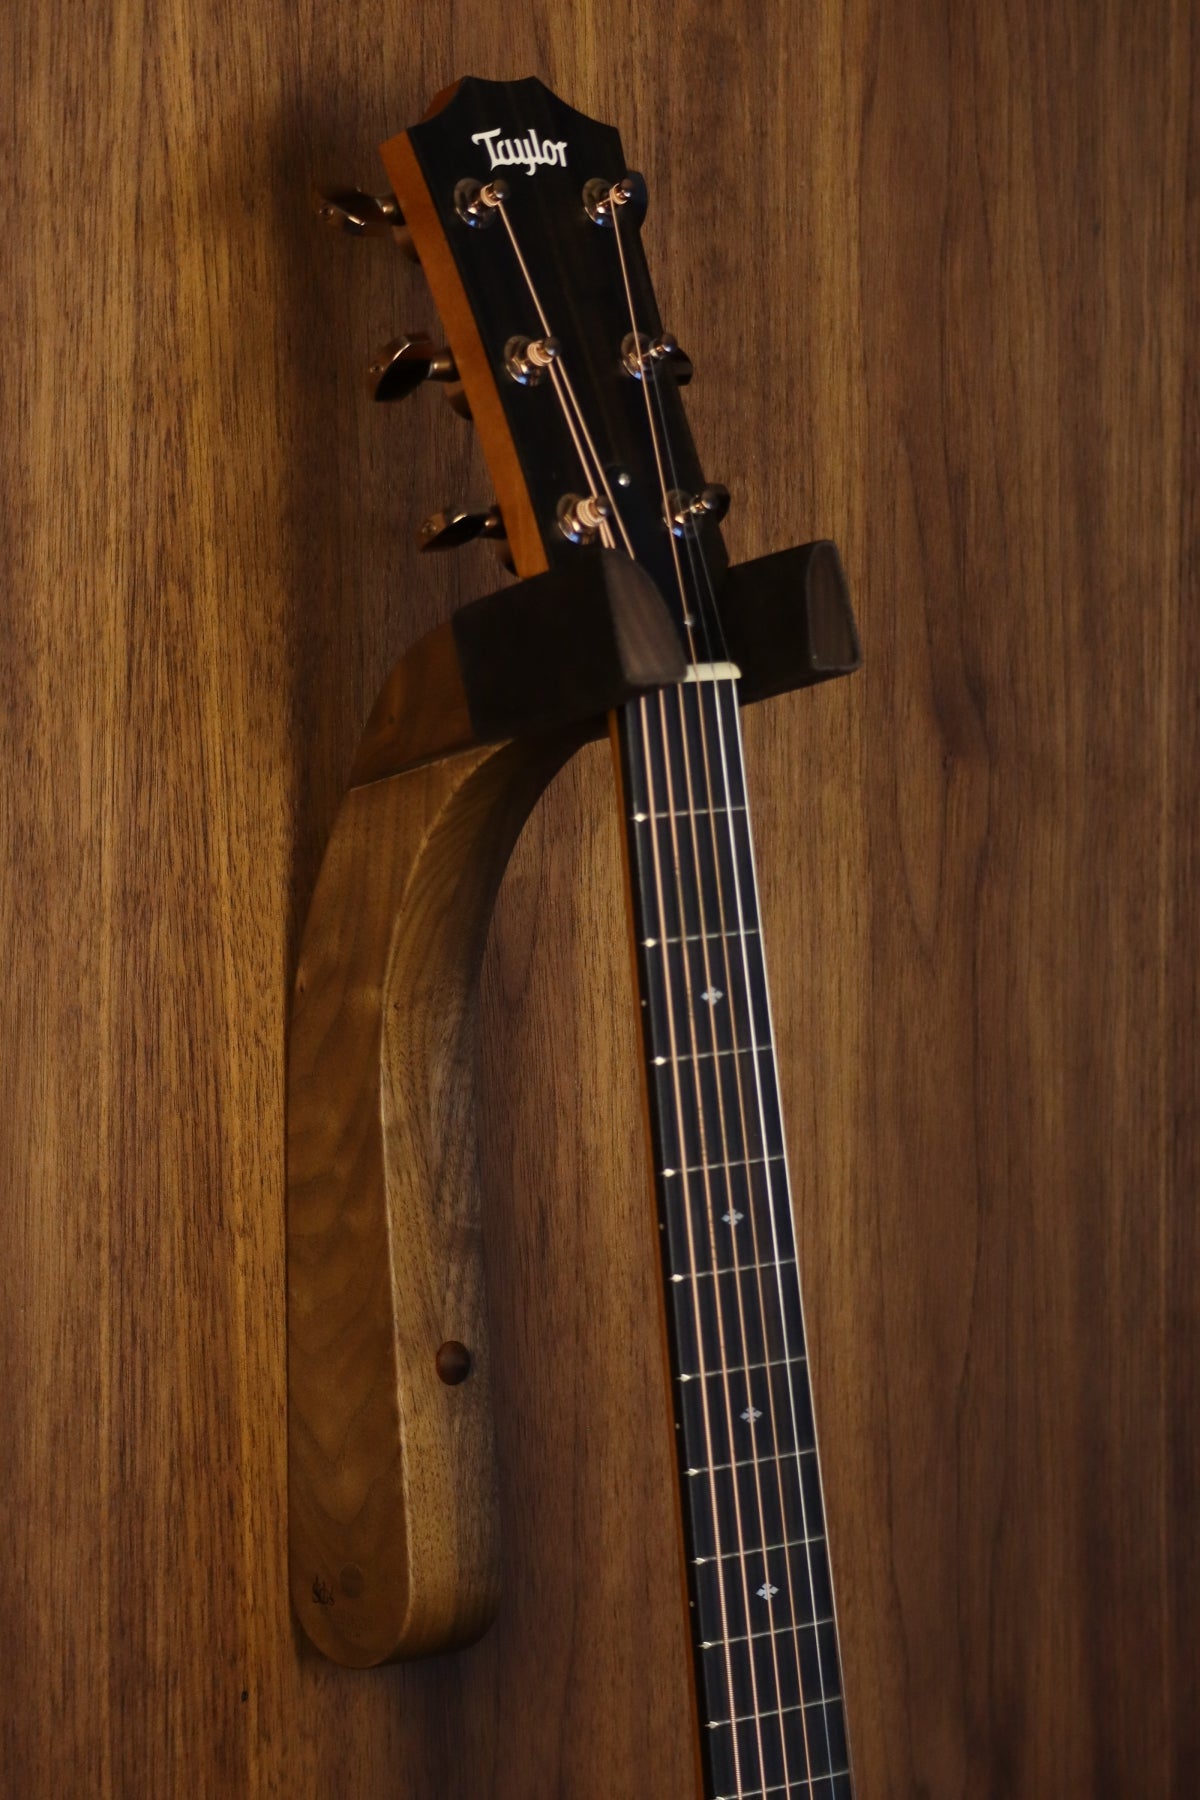 Walnut wood guitar wall mount hanger installed on paneled wall with Taylor guitar